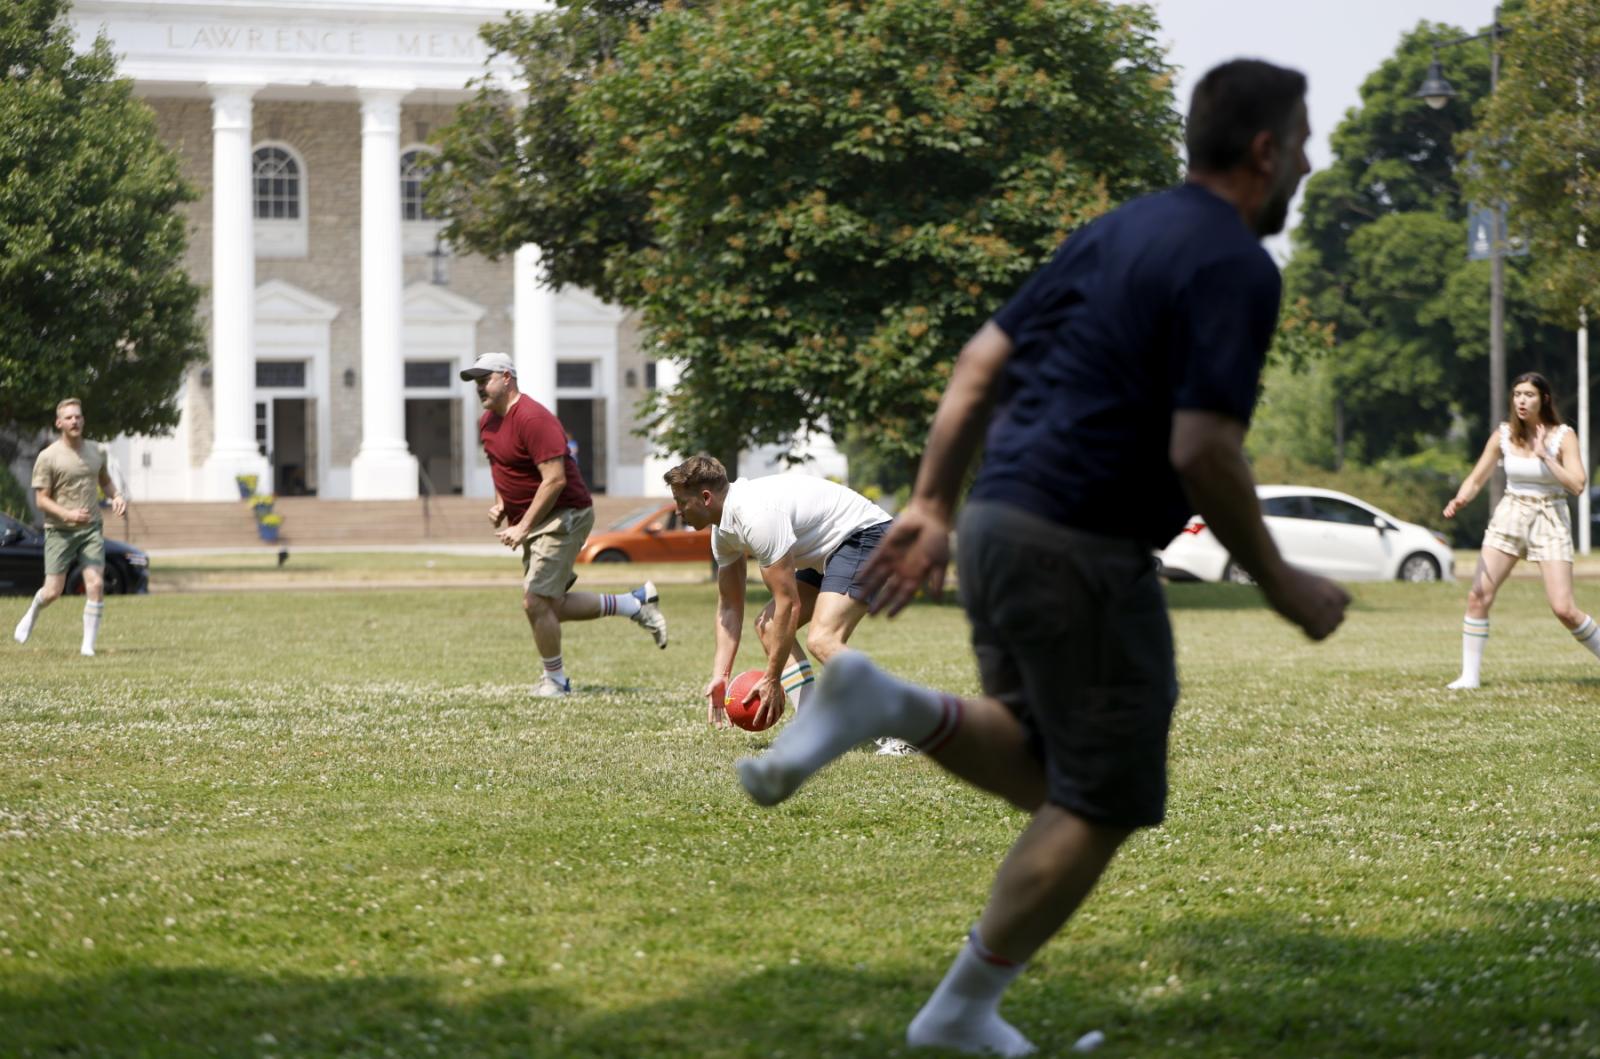 Members of the 20th and 25th reunions play kickball on Main Hall Green.